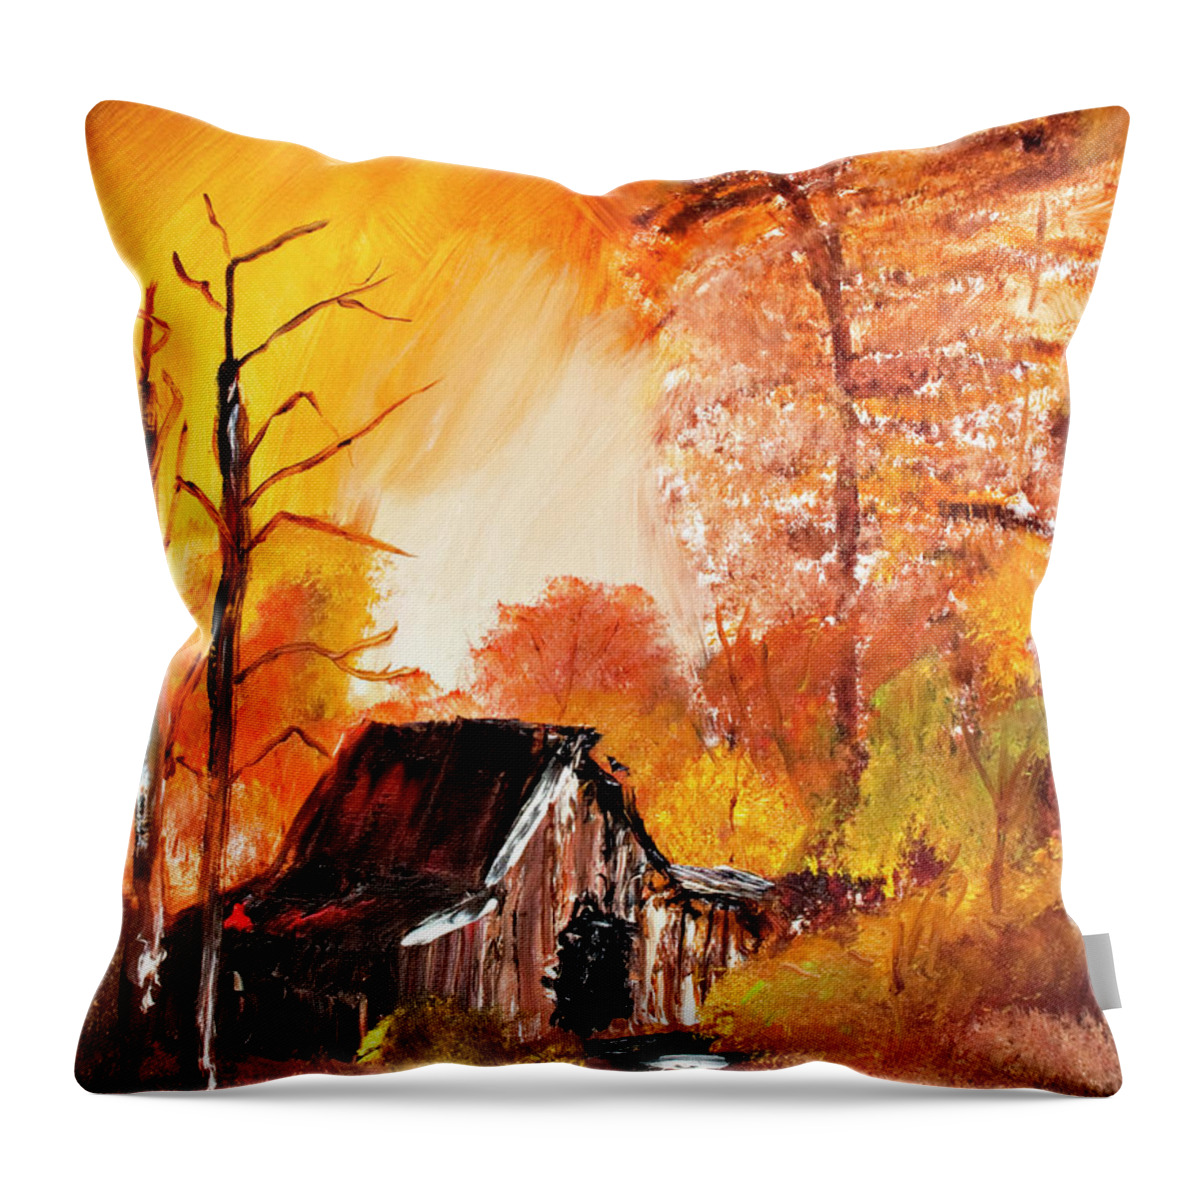 Cabin Throw Pillow featuring the painting Cabin In the Fall Woods by David Martin